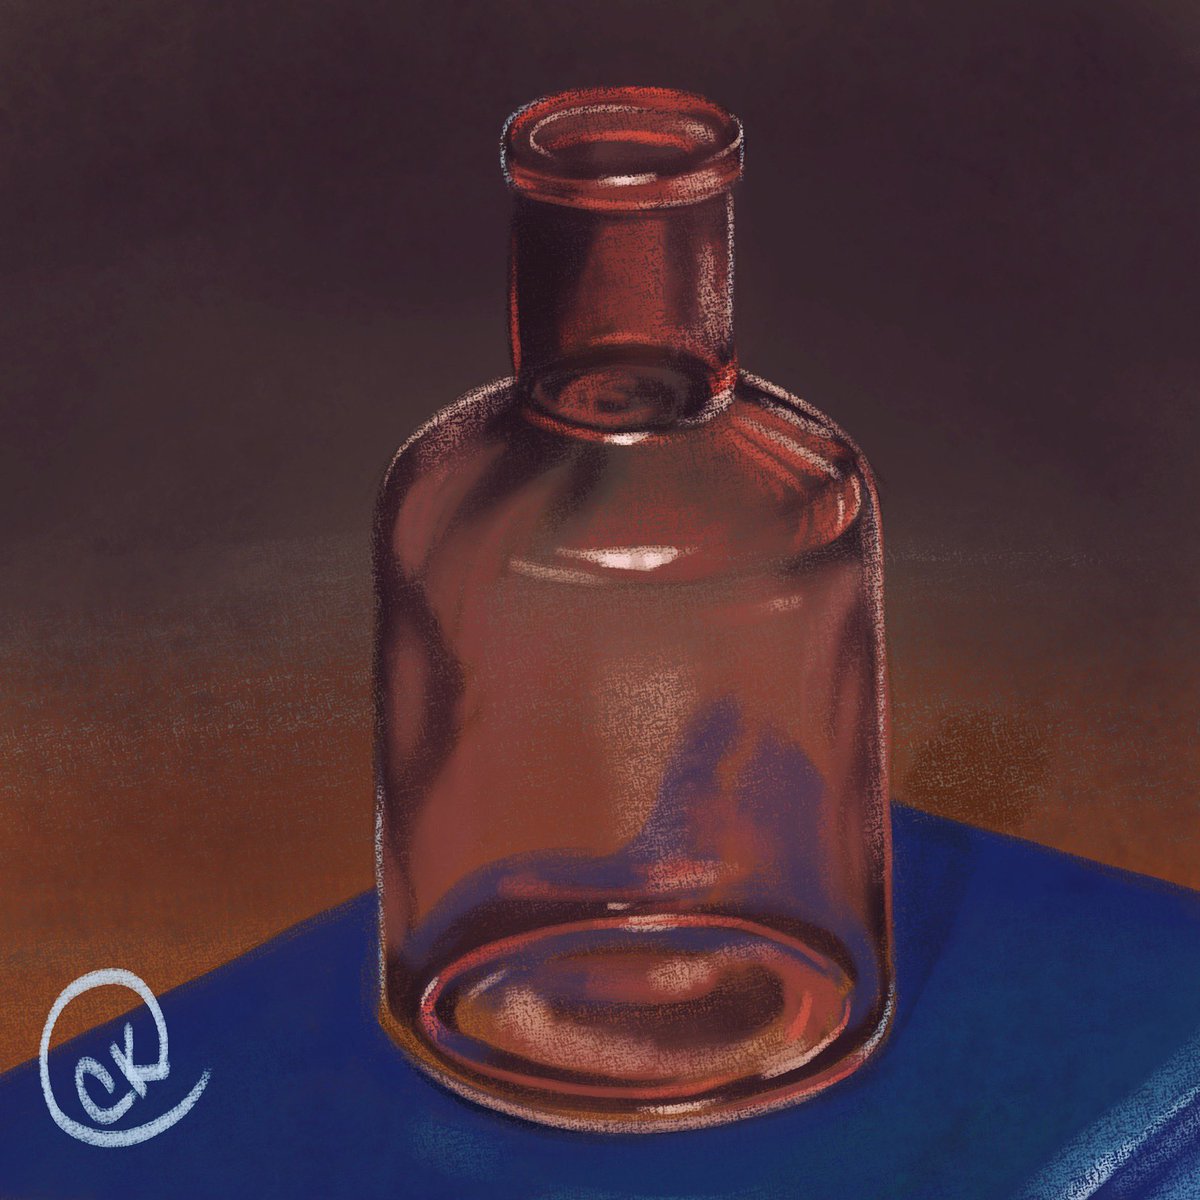 A cute pink bottle I bought at target. #stilllife #stilllifedrawing #stilllifeart #stilllifeartist #studydrawing #ceramic #ceramicbowl #lime #limes #realisticart #photorealism #art #draw #drawing #study #sketch #digitalart #digitaldrawing #digitalpainting #digitalsketch #digital